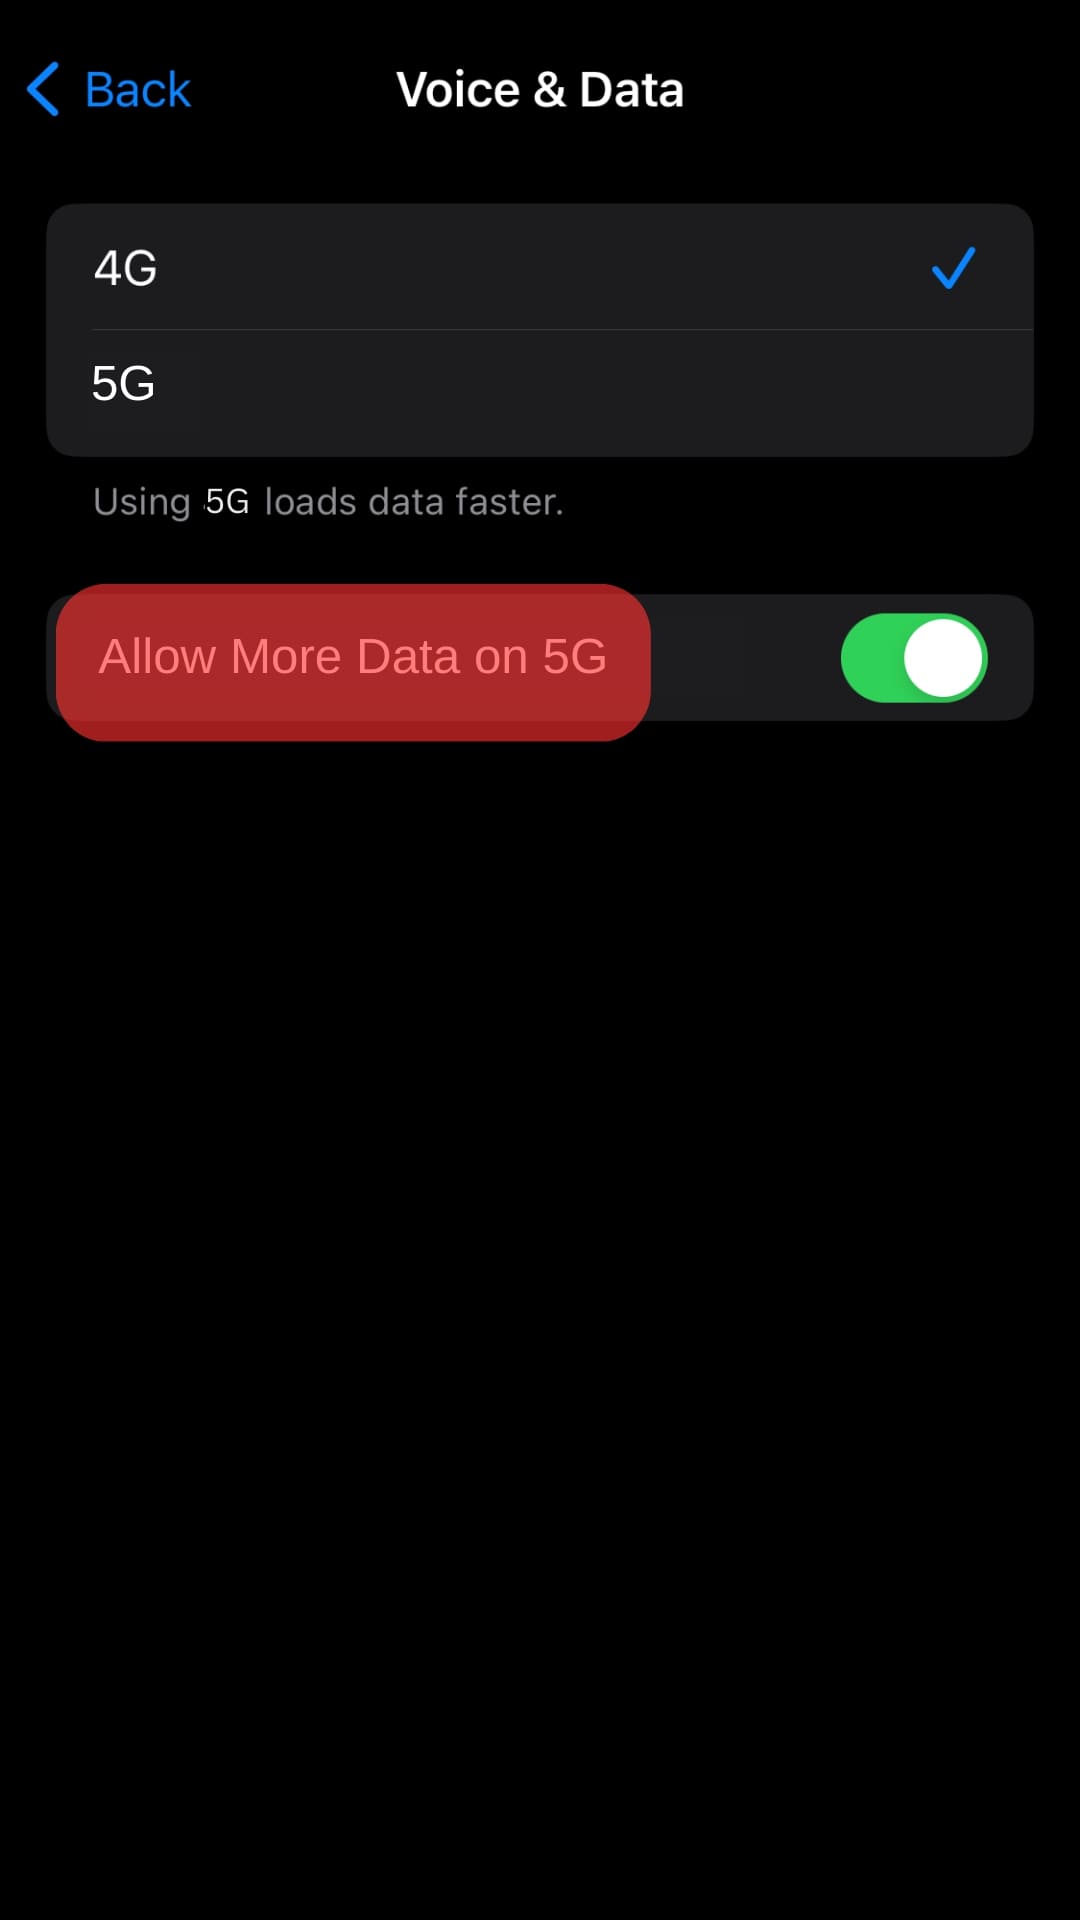 Select Allow More Data On 5G.